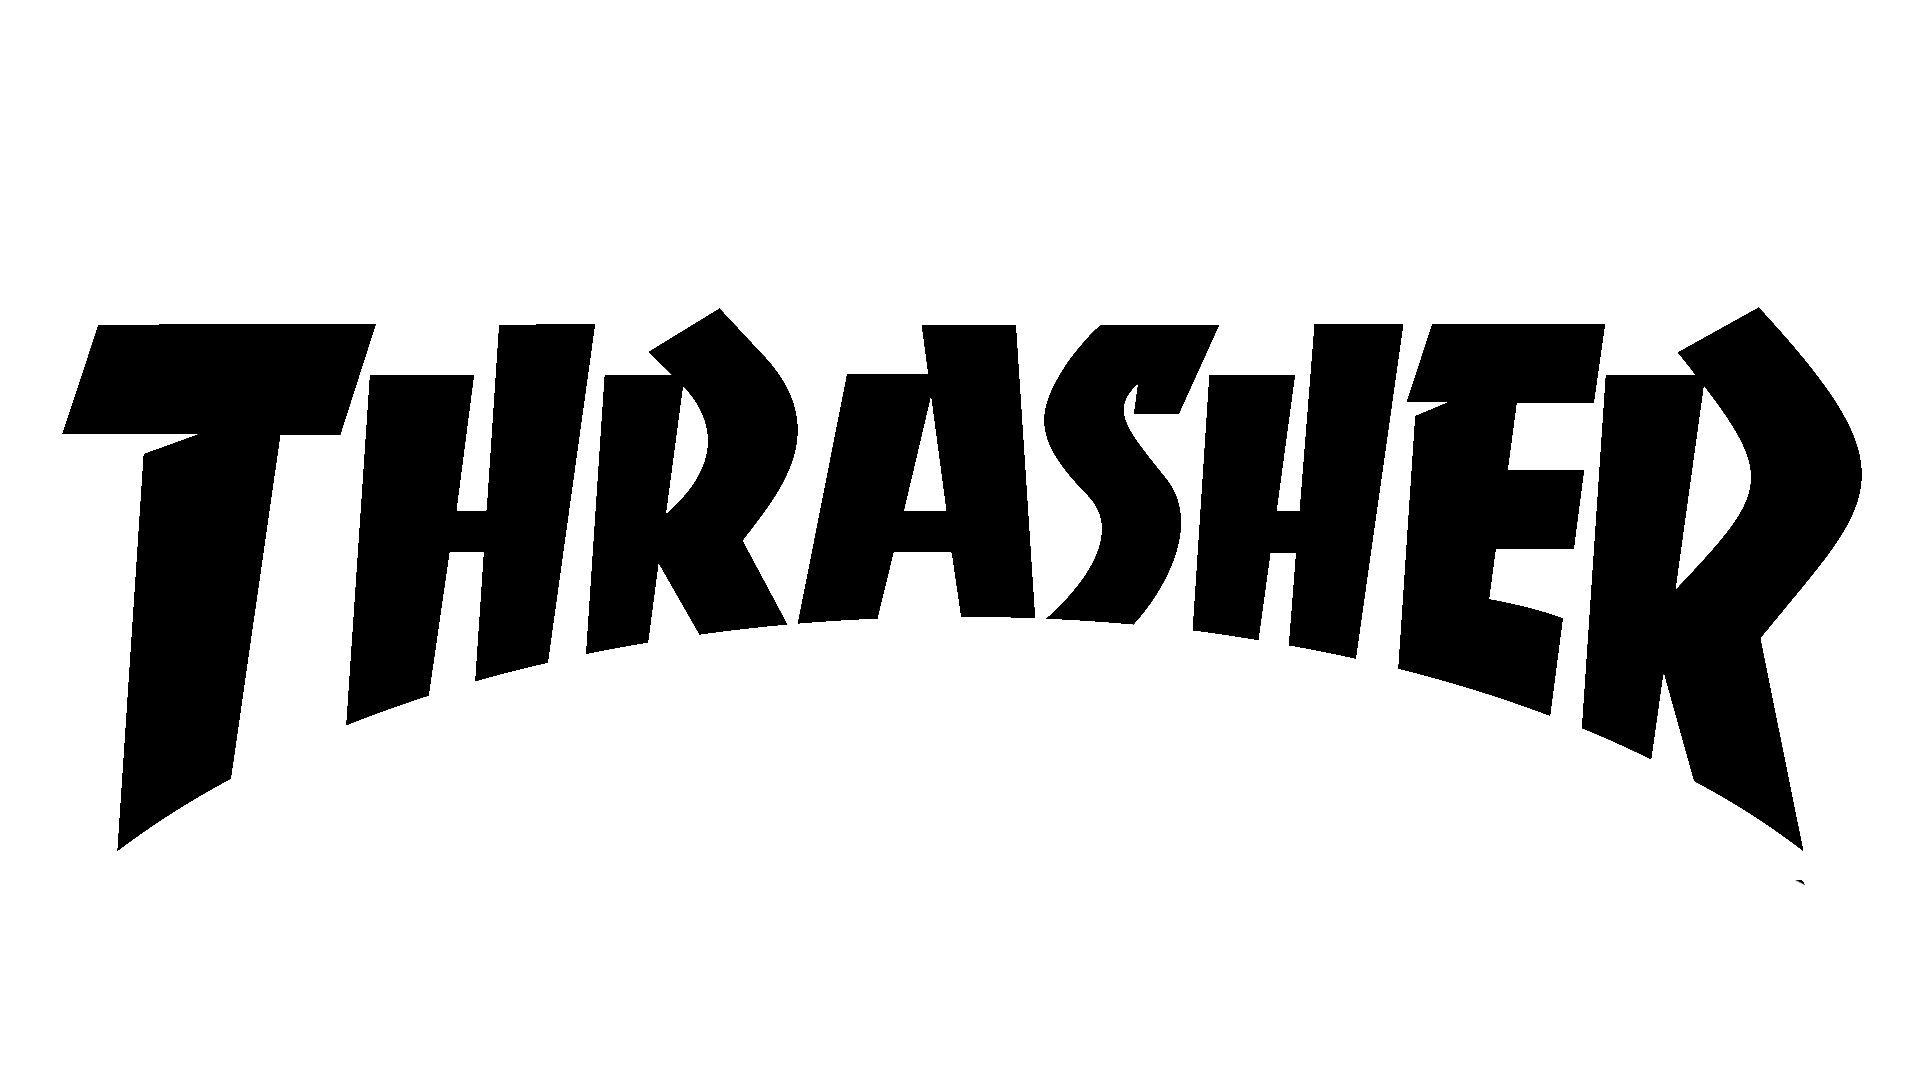 Thrasher Logo - Thrasher Logo, Thrasher Symbol, Meaning, History and Evolution